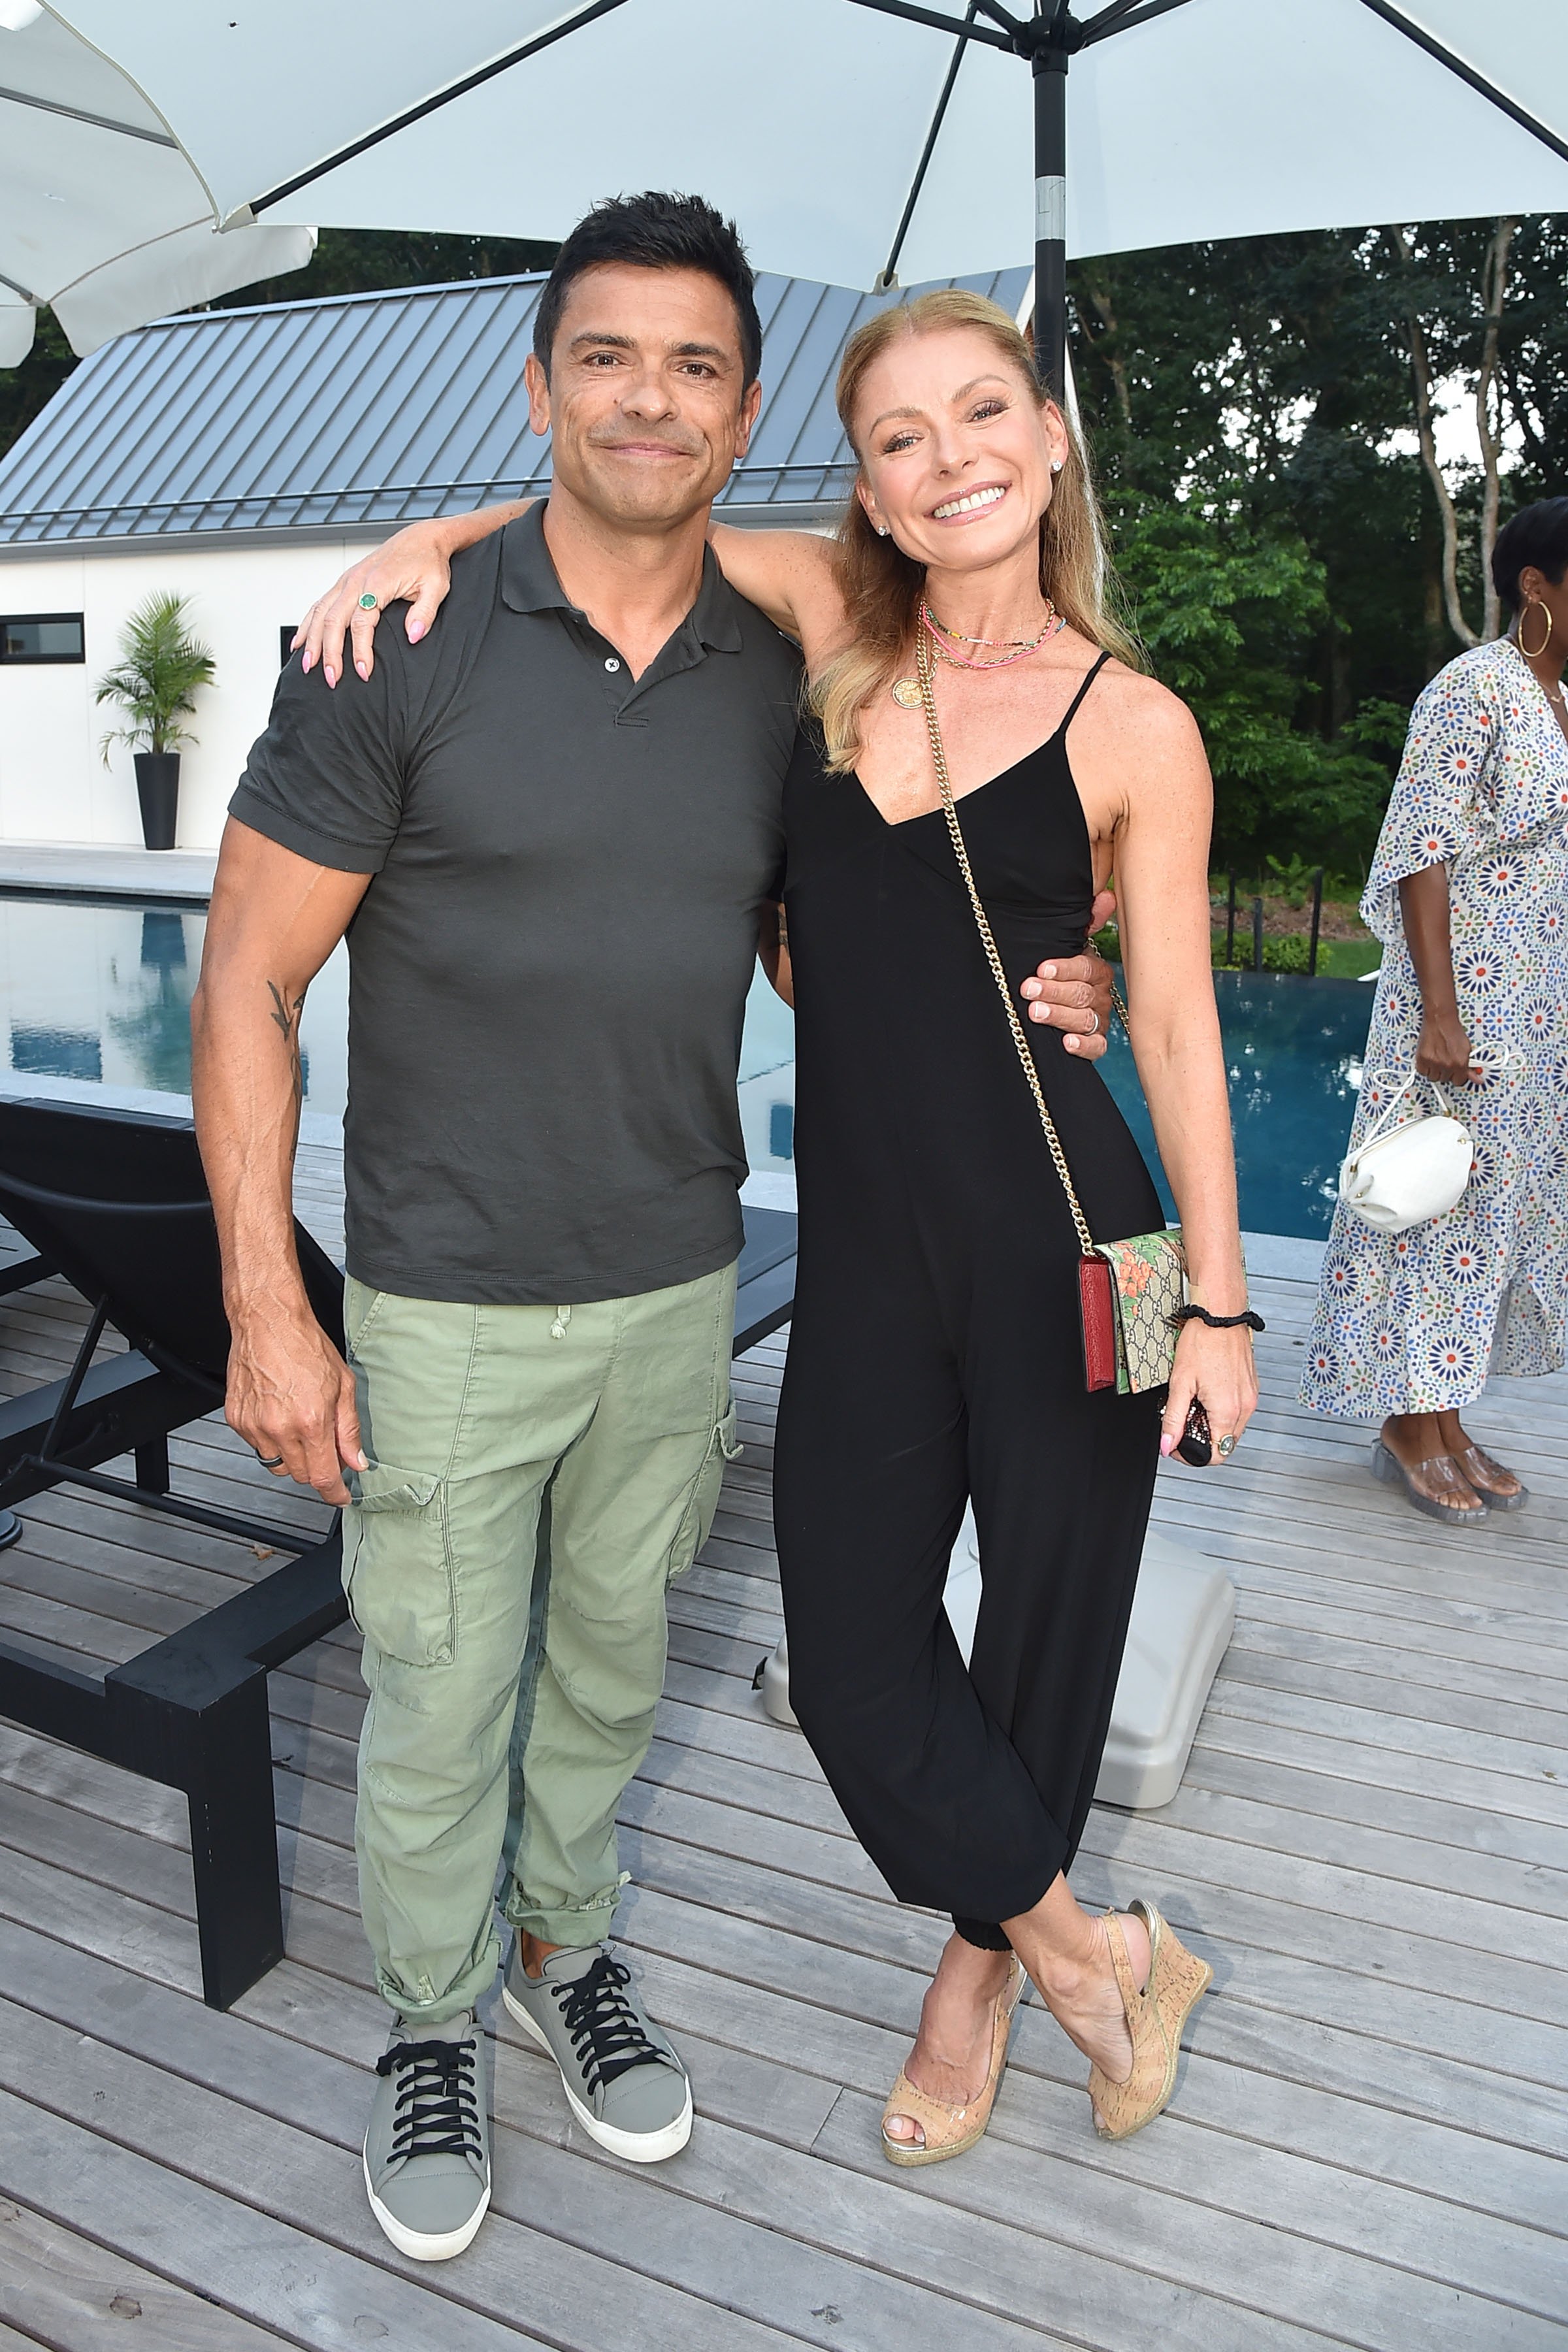 Mark Consuelos and Kelly Ripa at the Launch Of Yoga Pant Nation By Laurie Gelman in Water Mill, New York City | Photo: Patrick McMullan via Getty Images